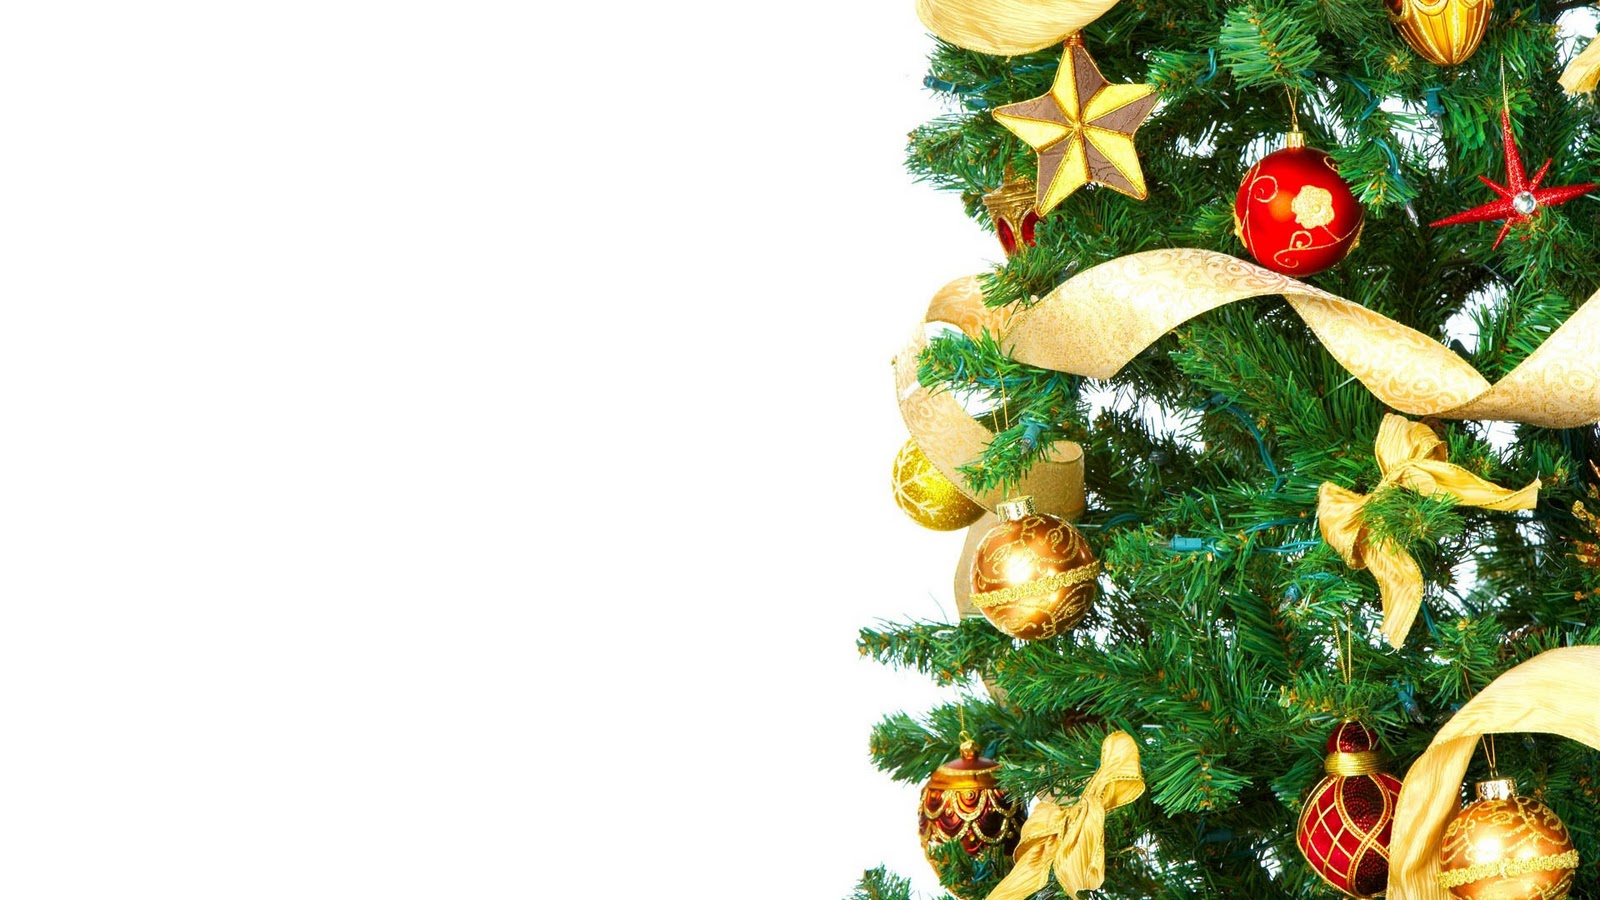 Best Christmas Tree 2012 PPT Backgrounds